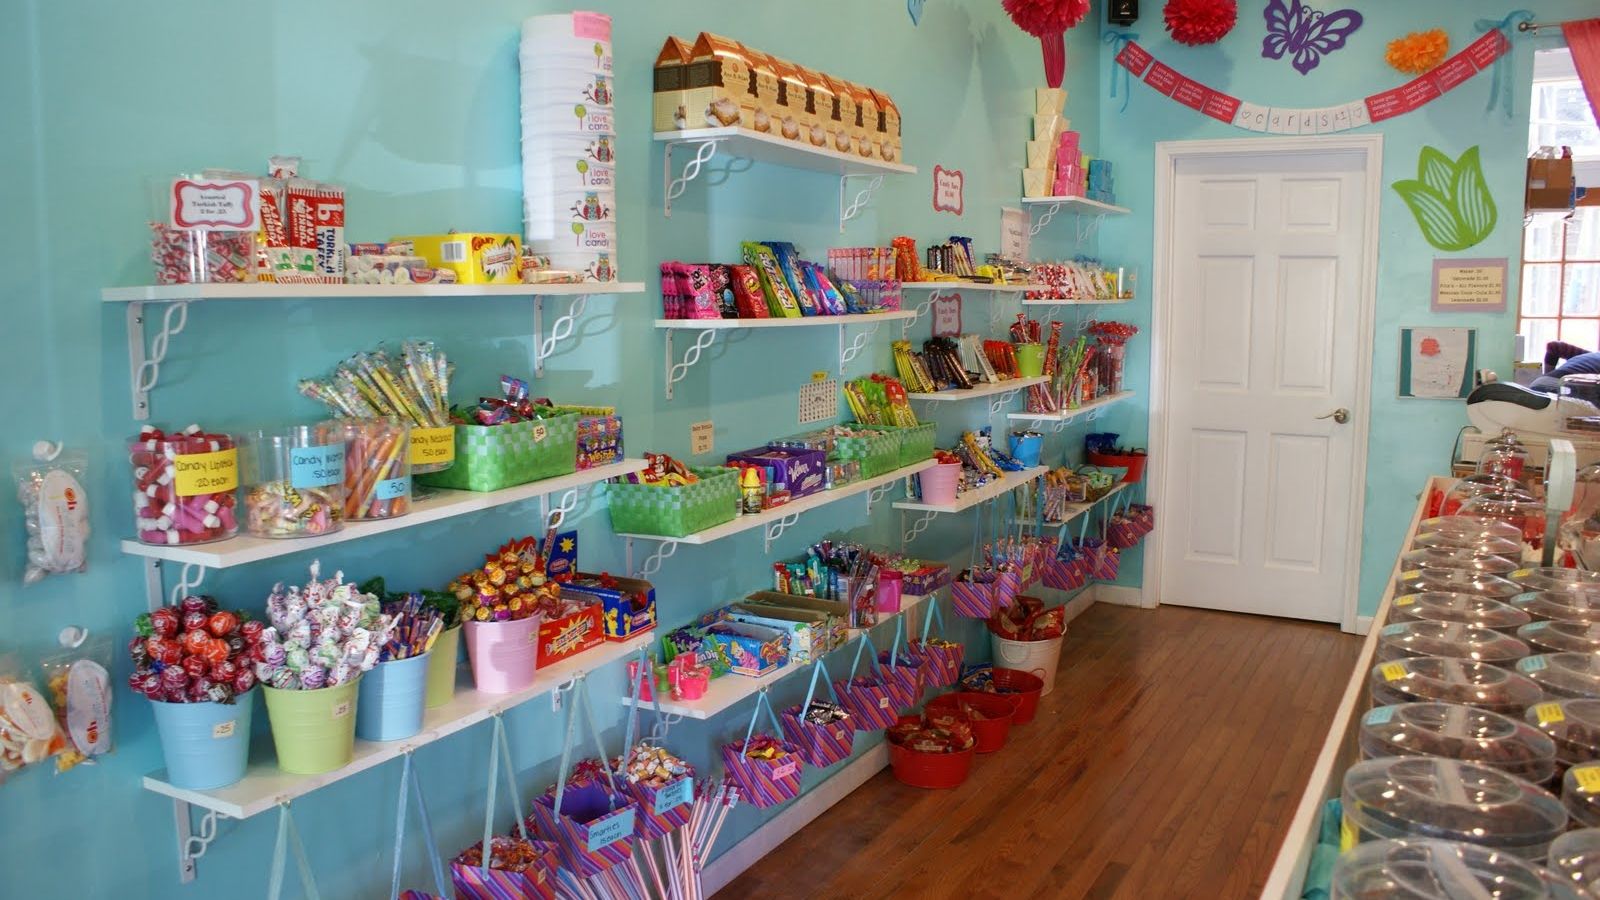 Candy Store Wallpaper Free Candy Store Background